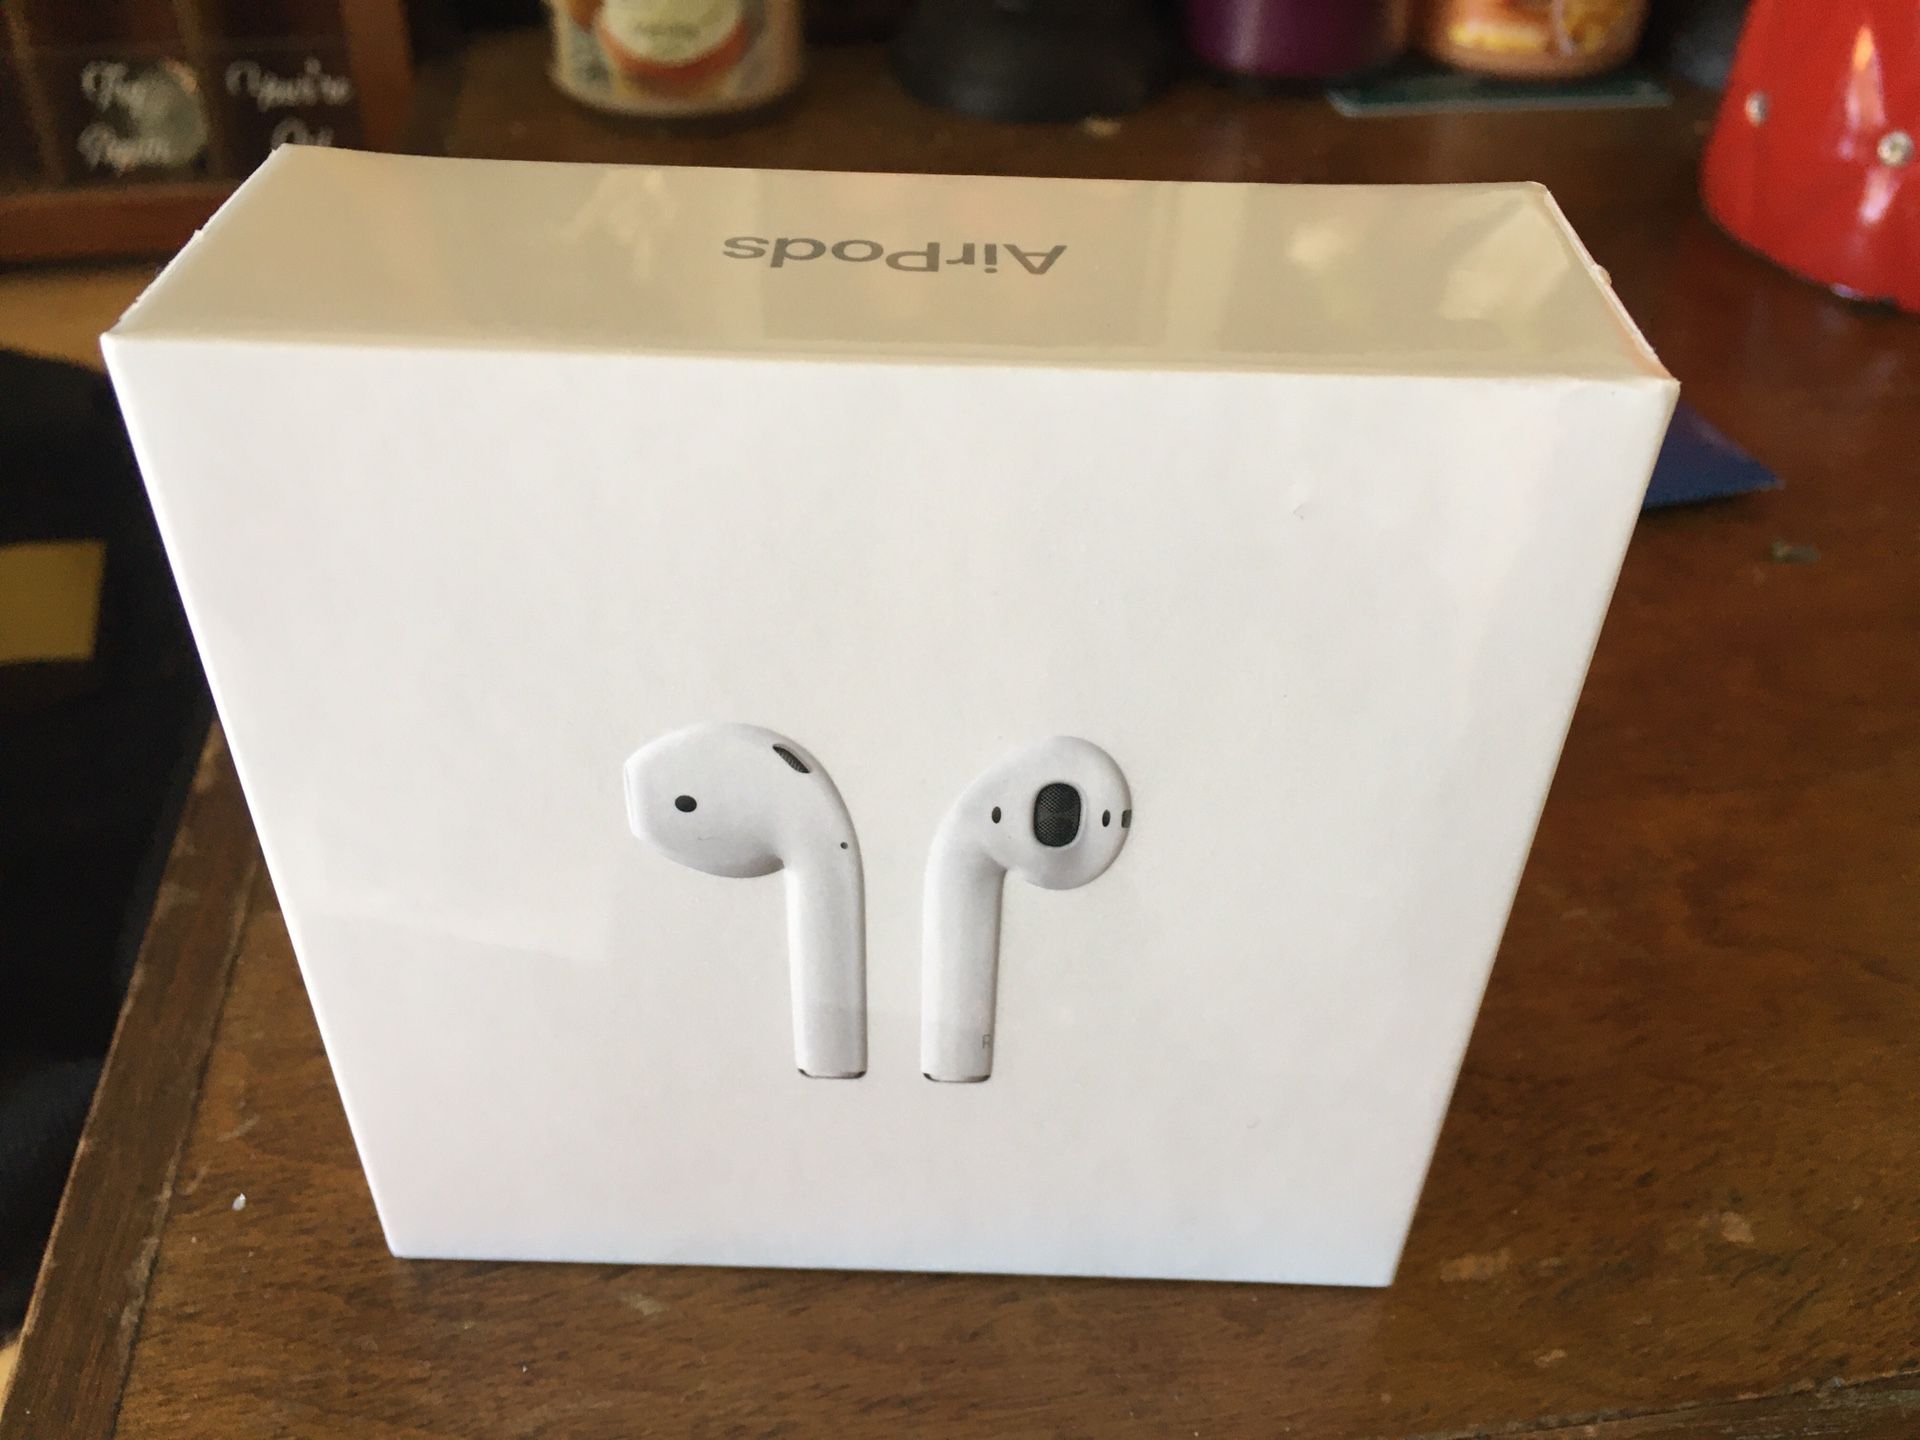 AirPods 2nd generation